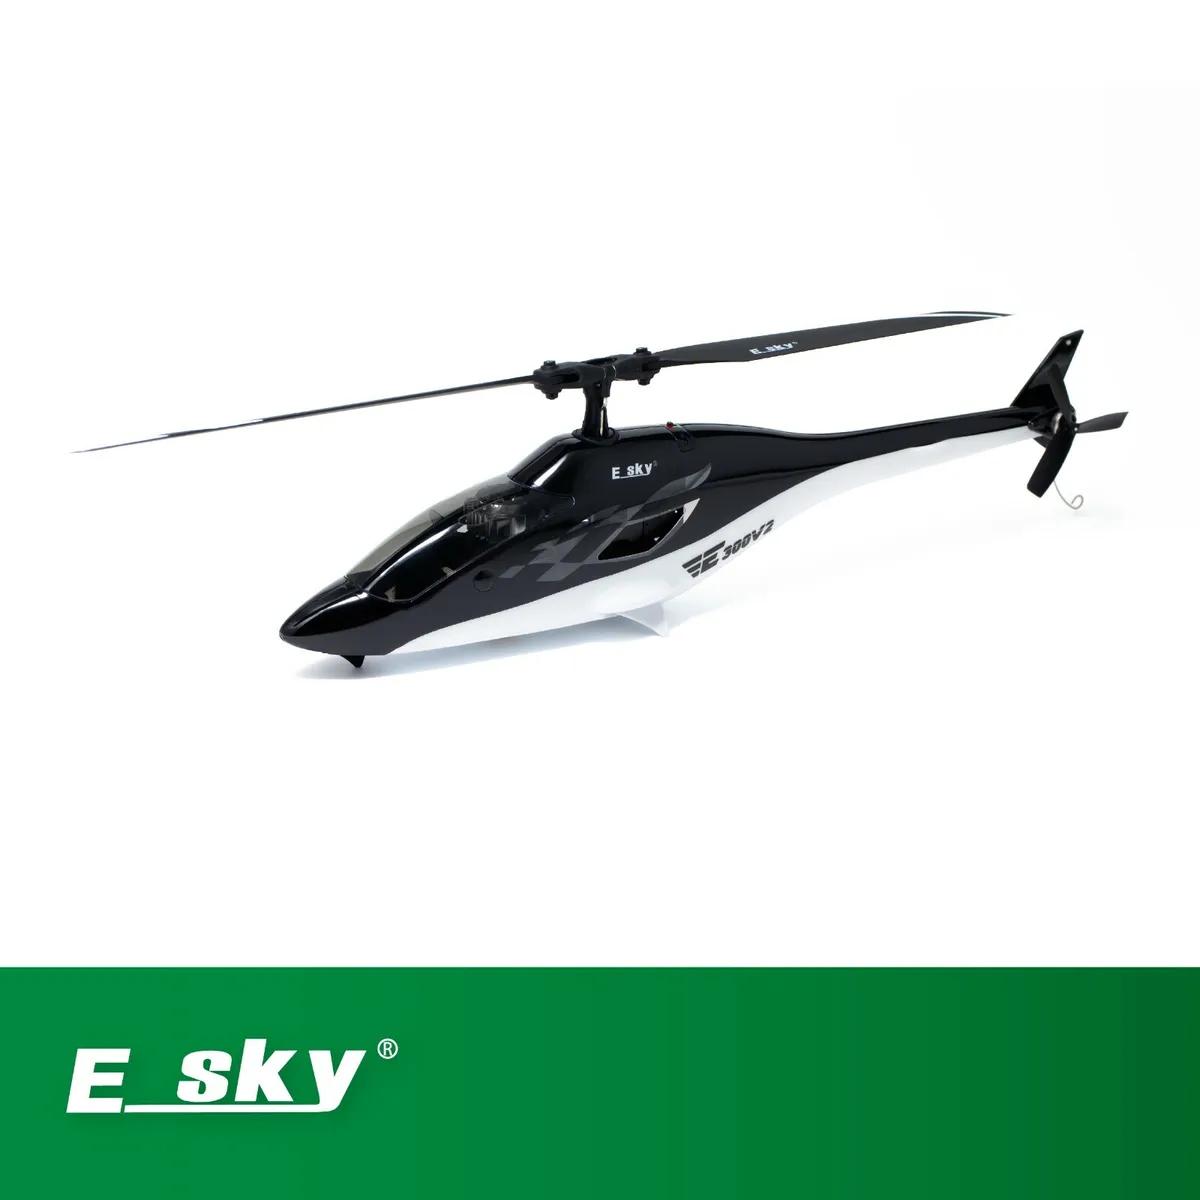 Esky 300 V2 Price: Long-lasting, Durable Design with Lifetime Warranty Only for ESky 300 V2 - Check Pricing and Availability Now! 